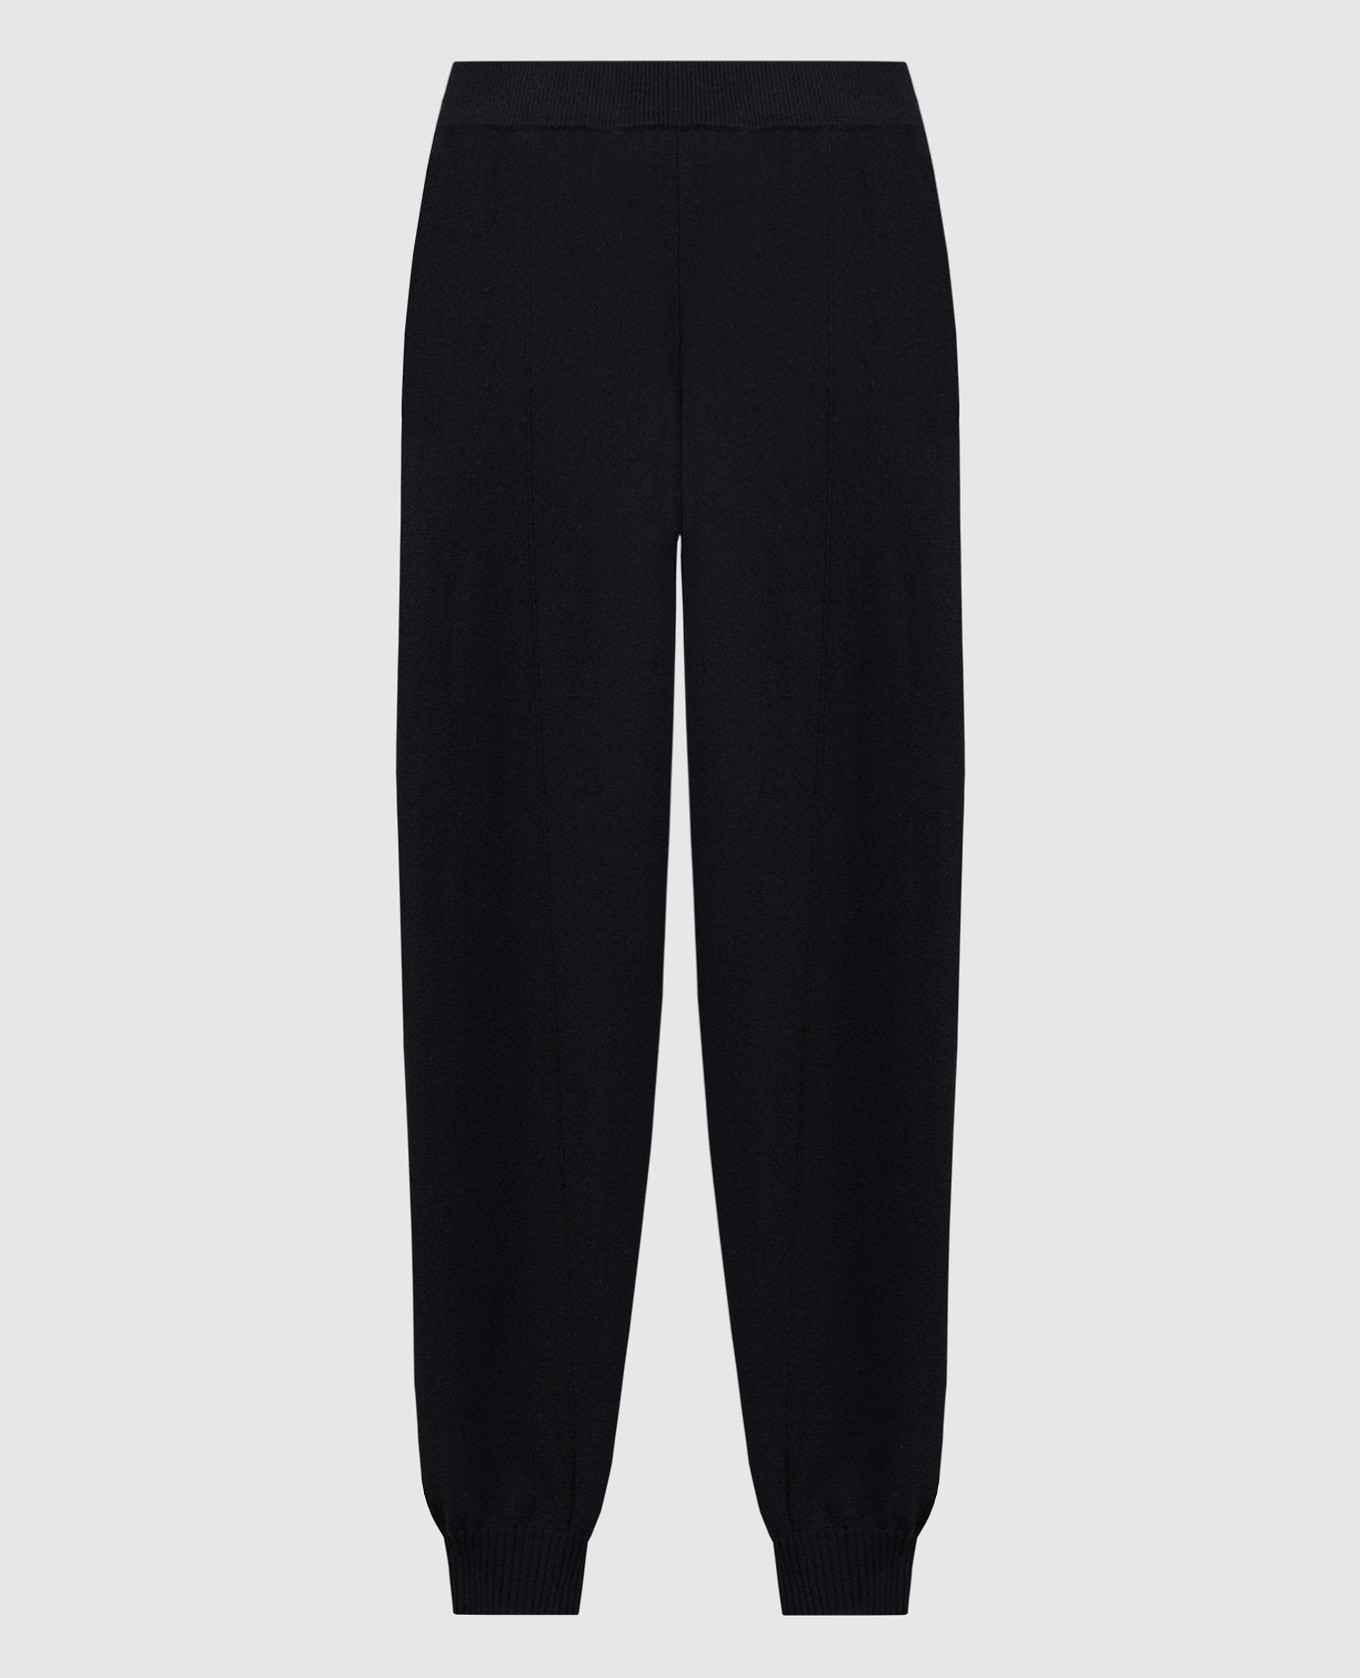 Black joggers made of wool